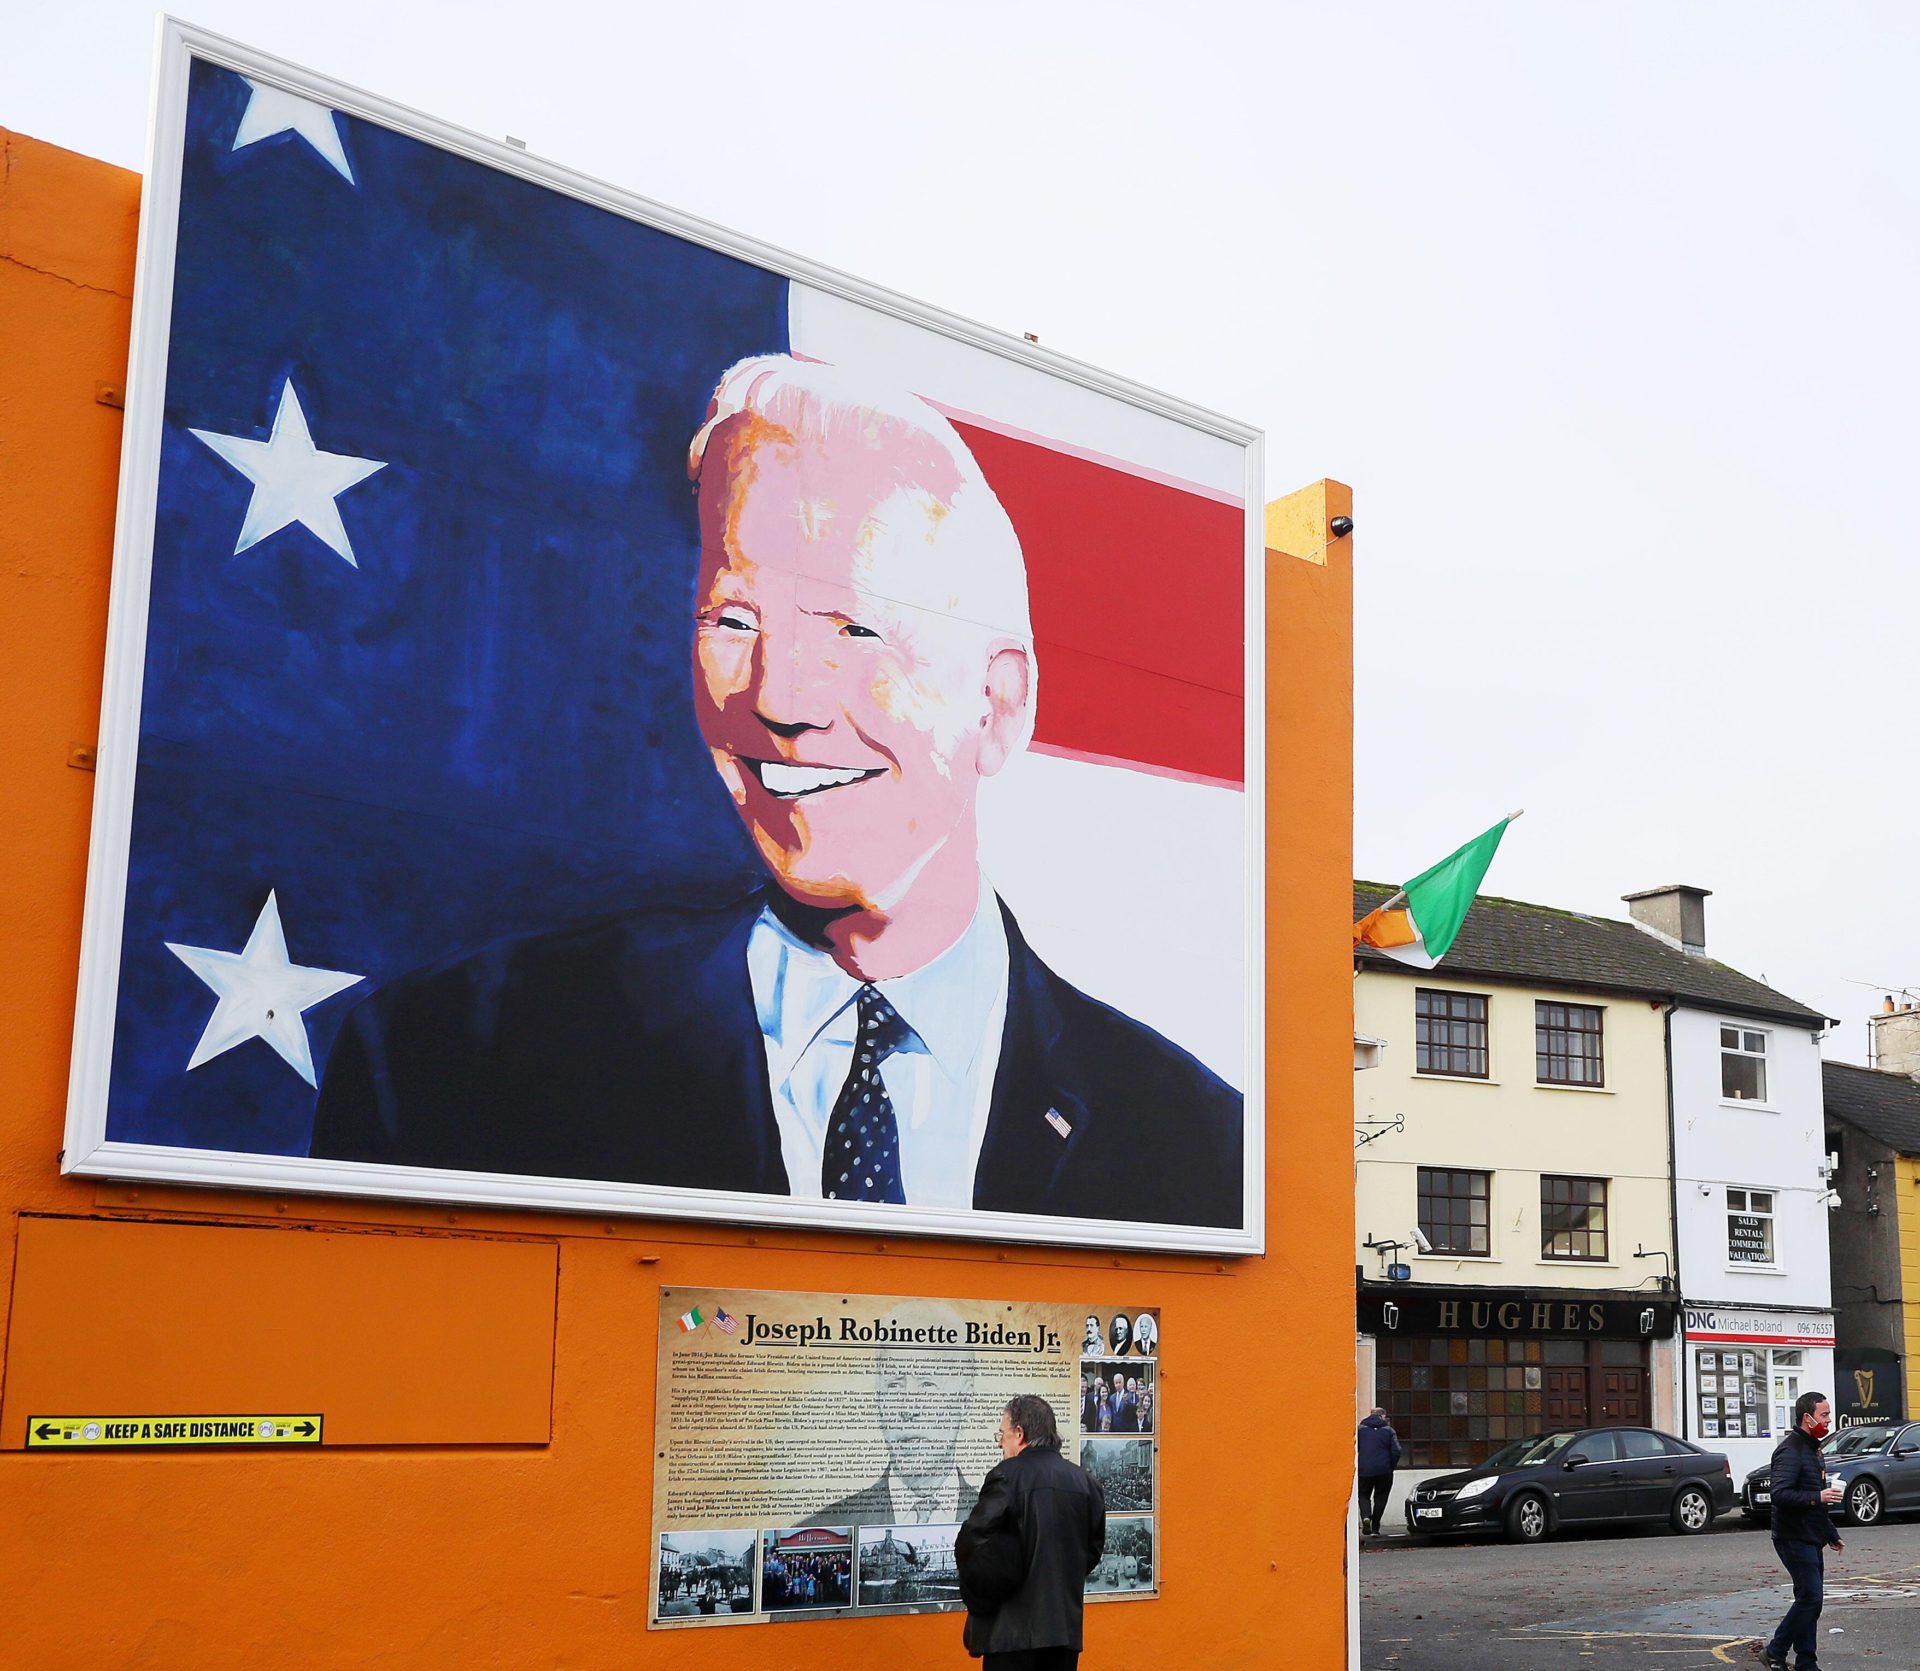 A man stops to read a plaque below a mural of Joe Biden in his ancestral home of Ballina, Co Mayo in November 2020.